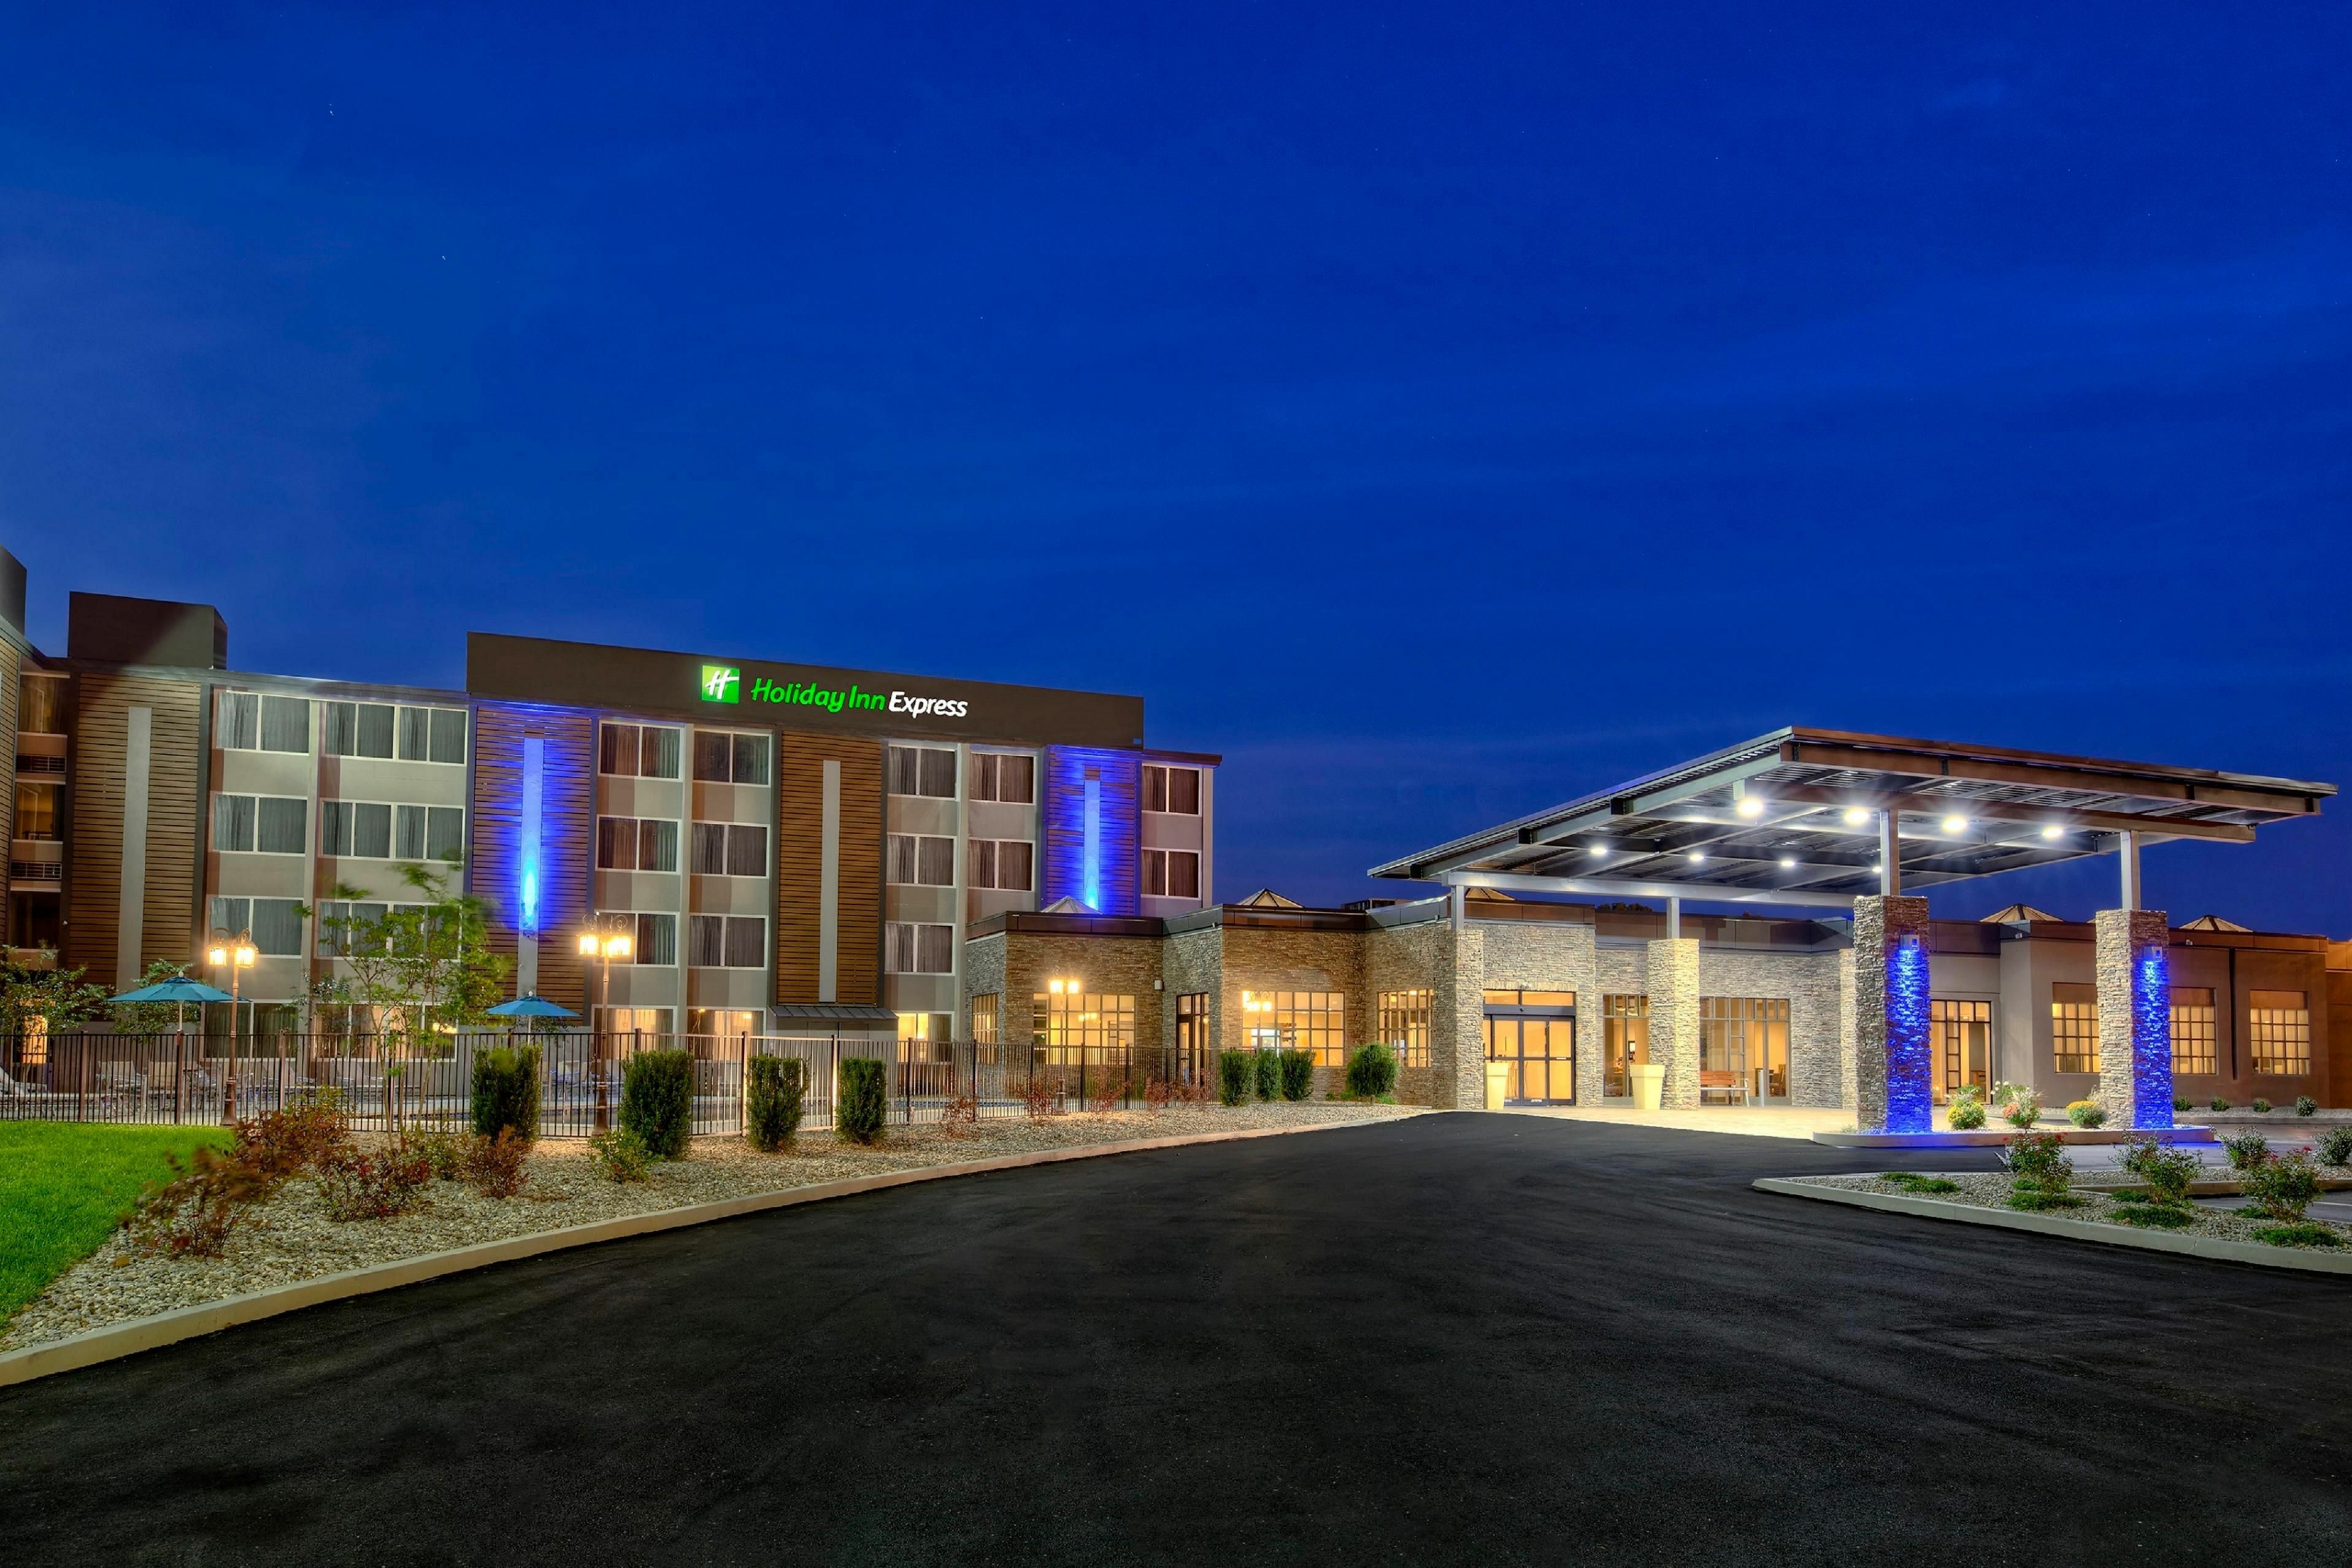 Photo of Holiday Inn Express Louisville Airport Expo Center, Louisville, KY